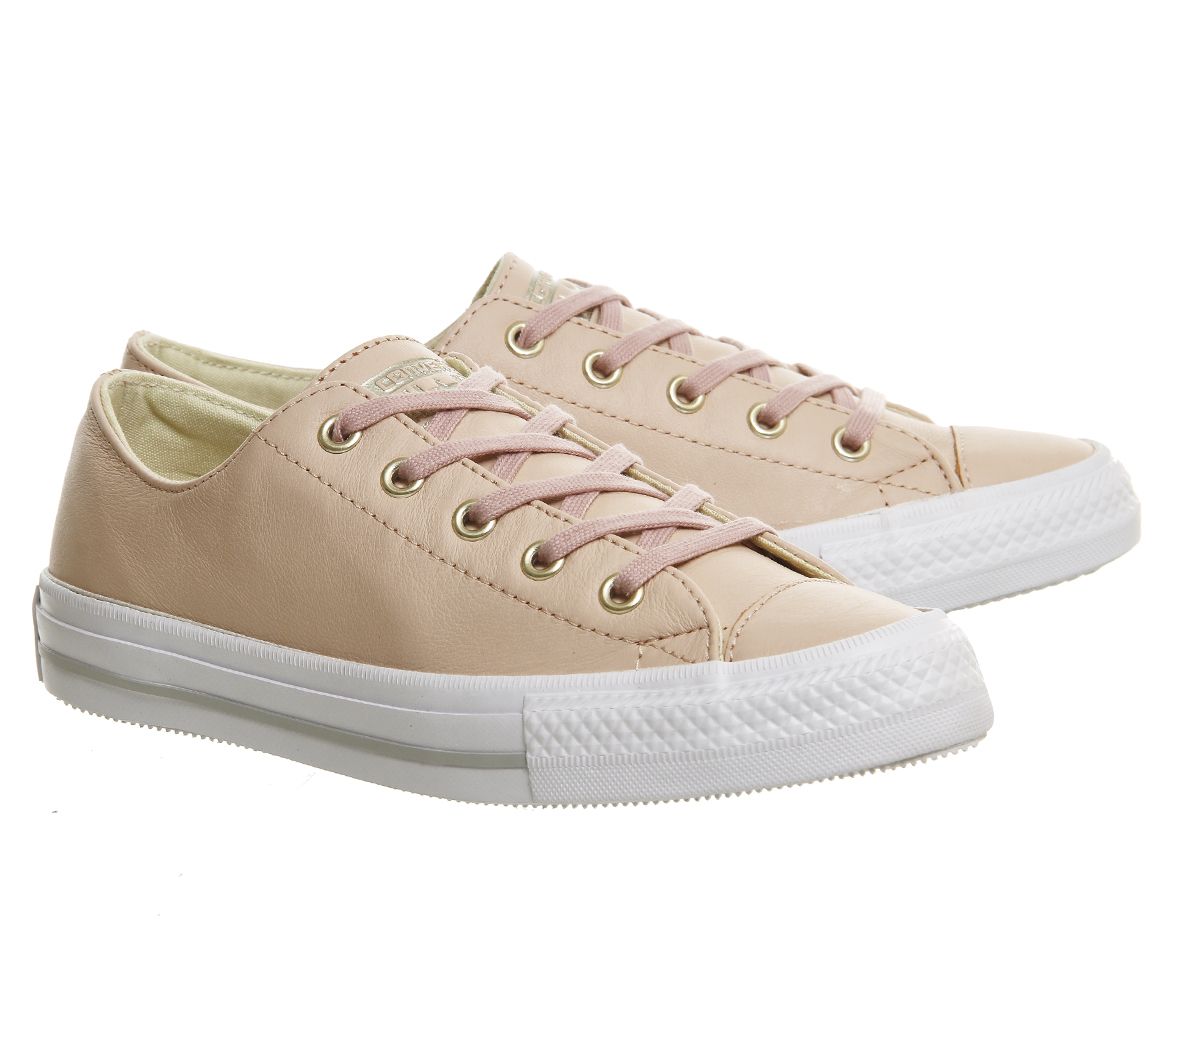 Converse All Star Leather Evening Sand Women's